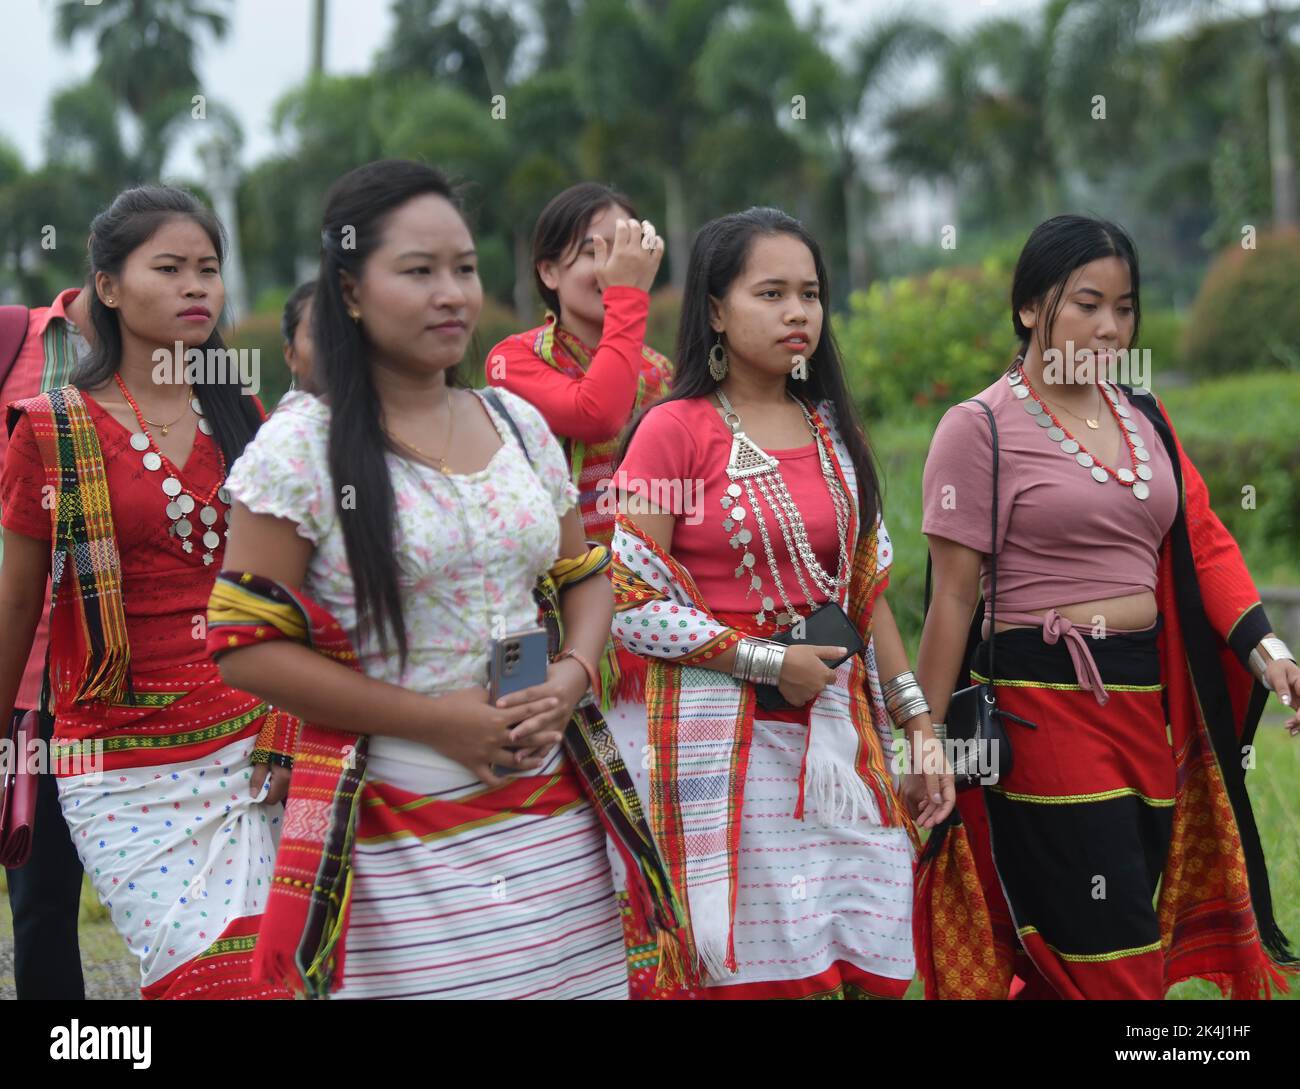 Indigenous people are walking with traditional folk dresses during a ...